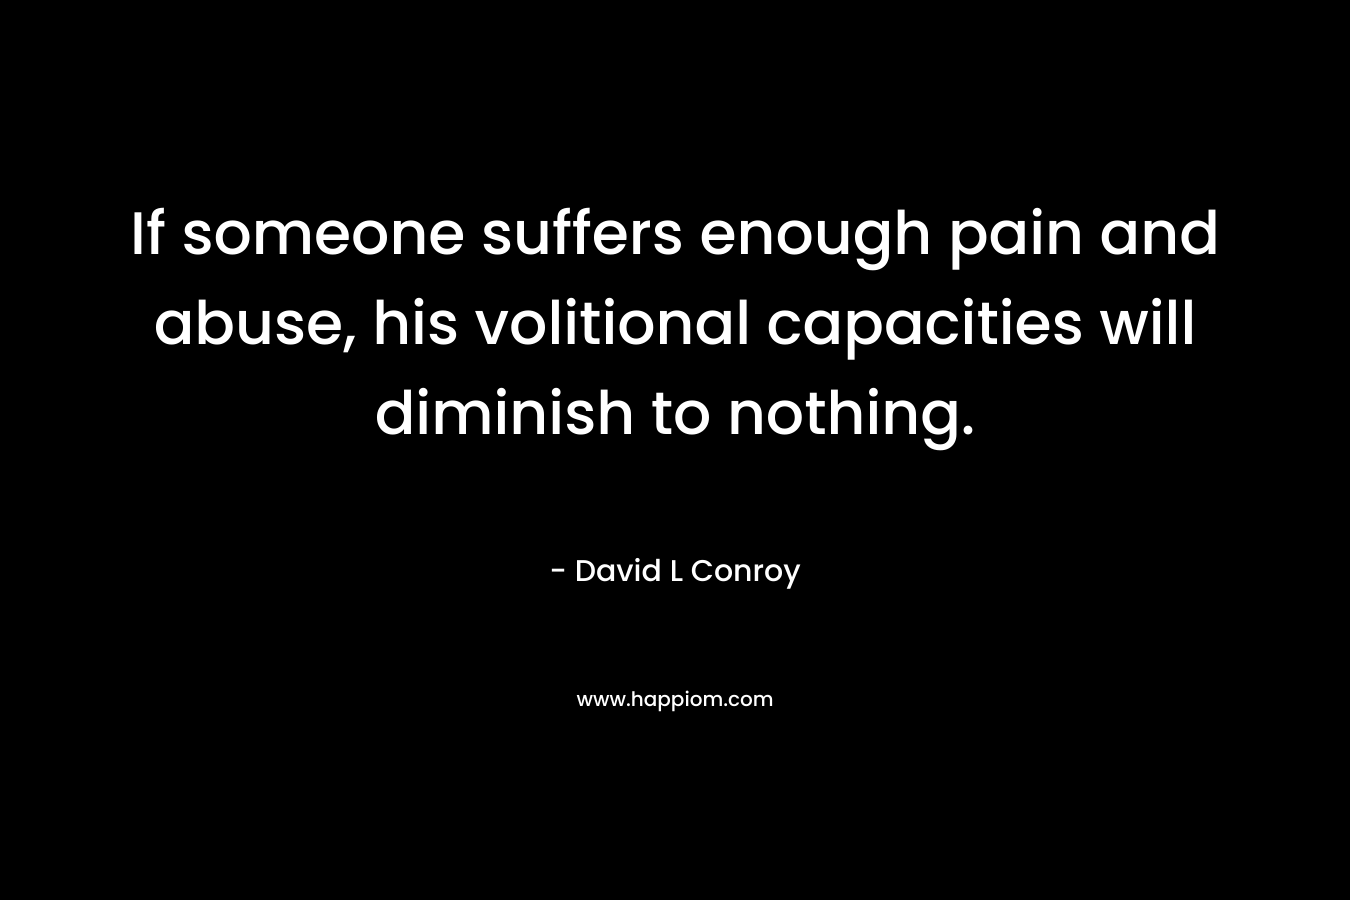 If someone suffers enough pain and abuse, his volitional capacities will diminish to nothing. – David L Conroy